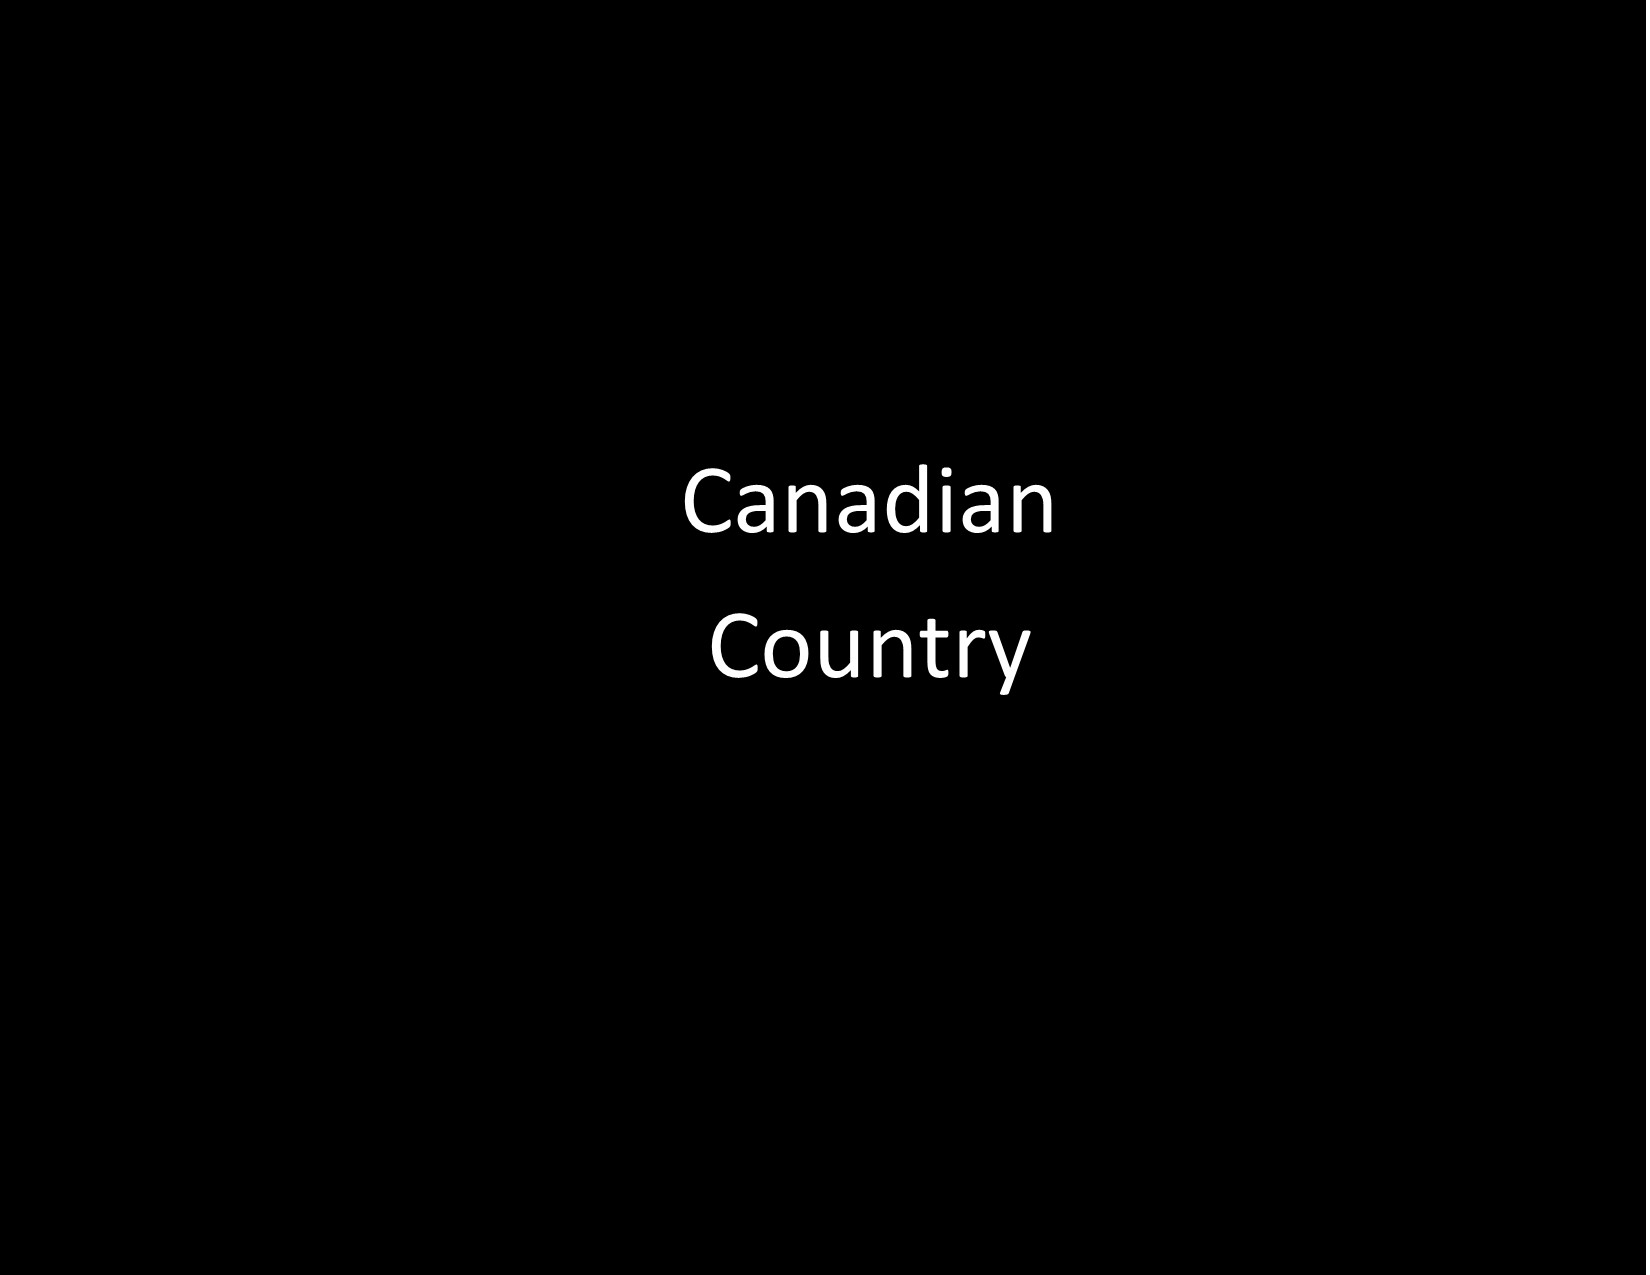 Canadian Country